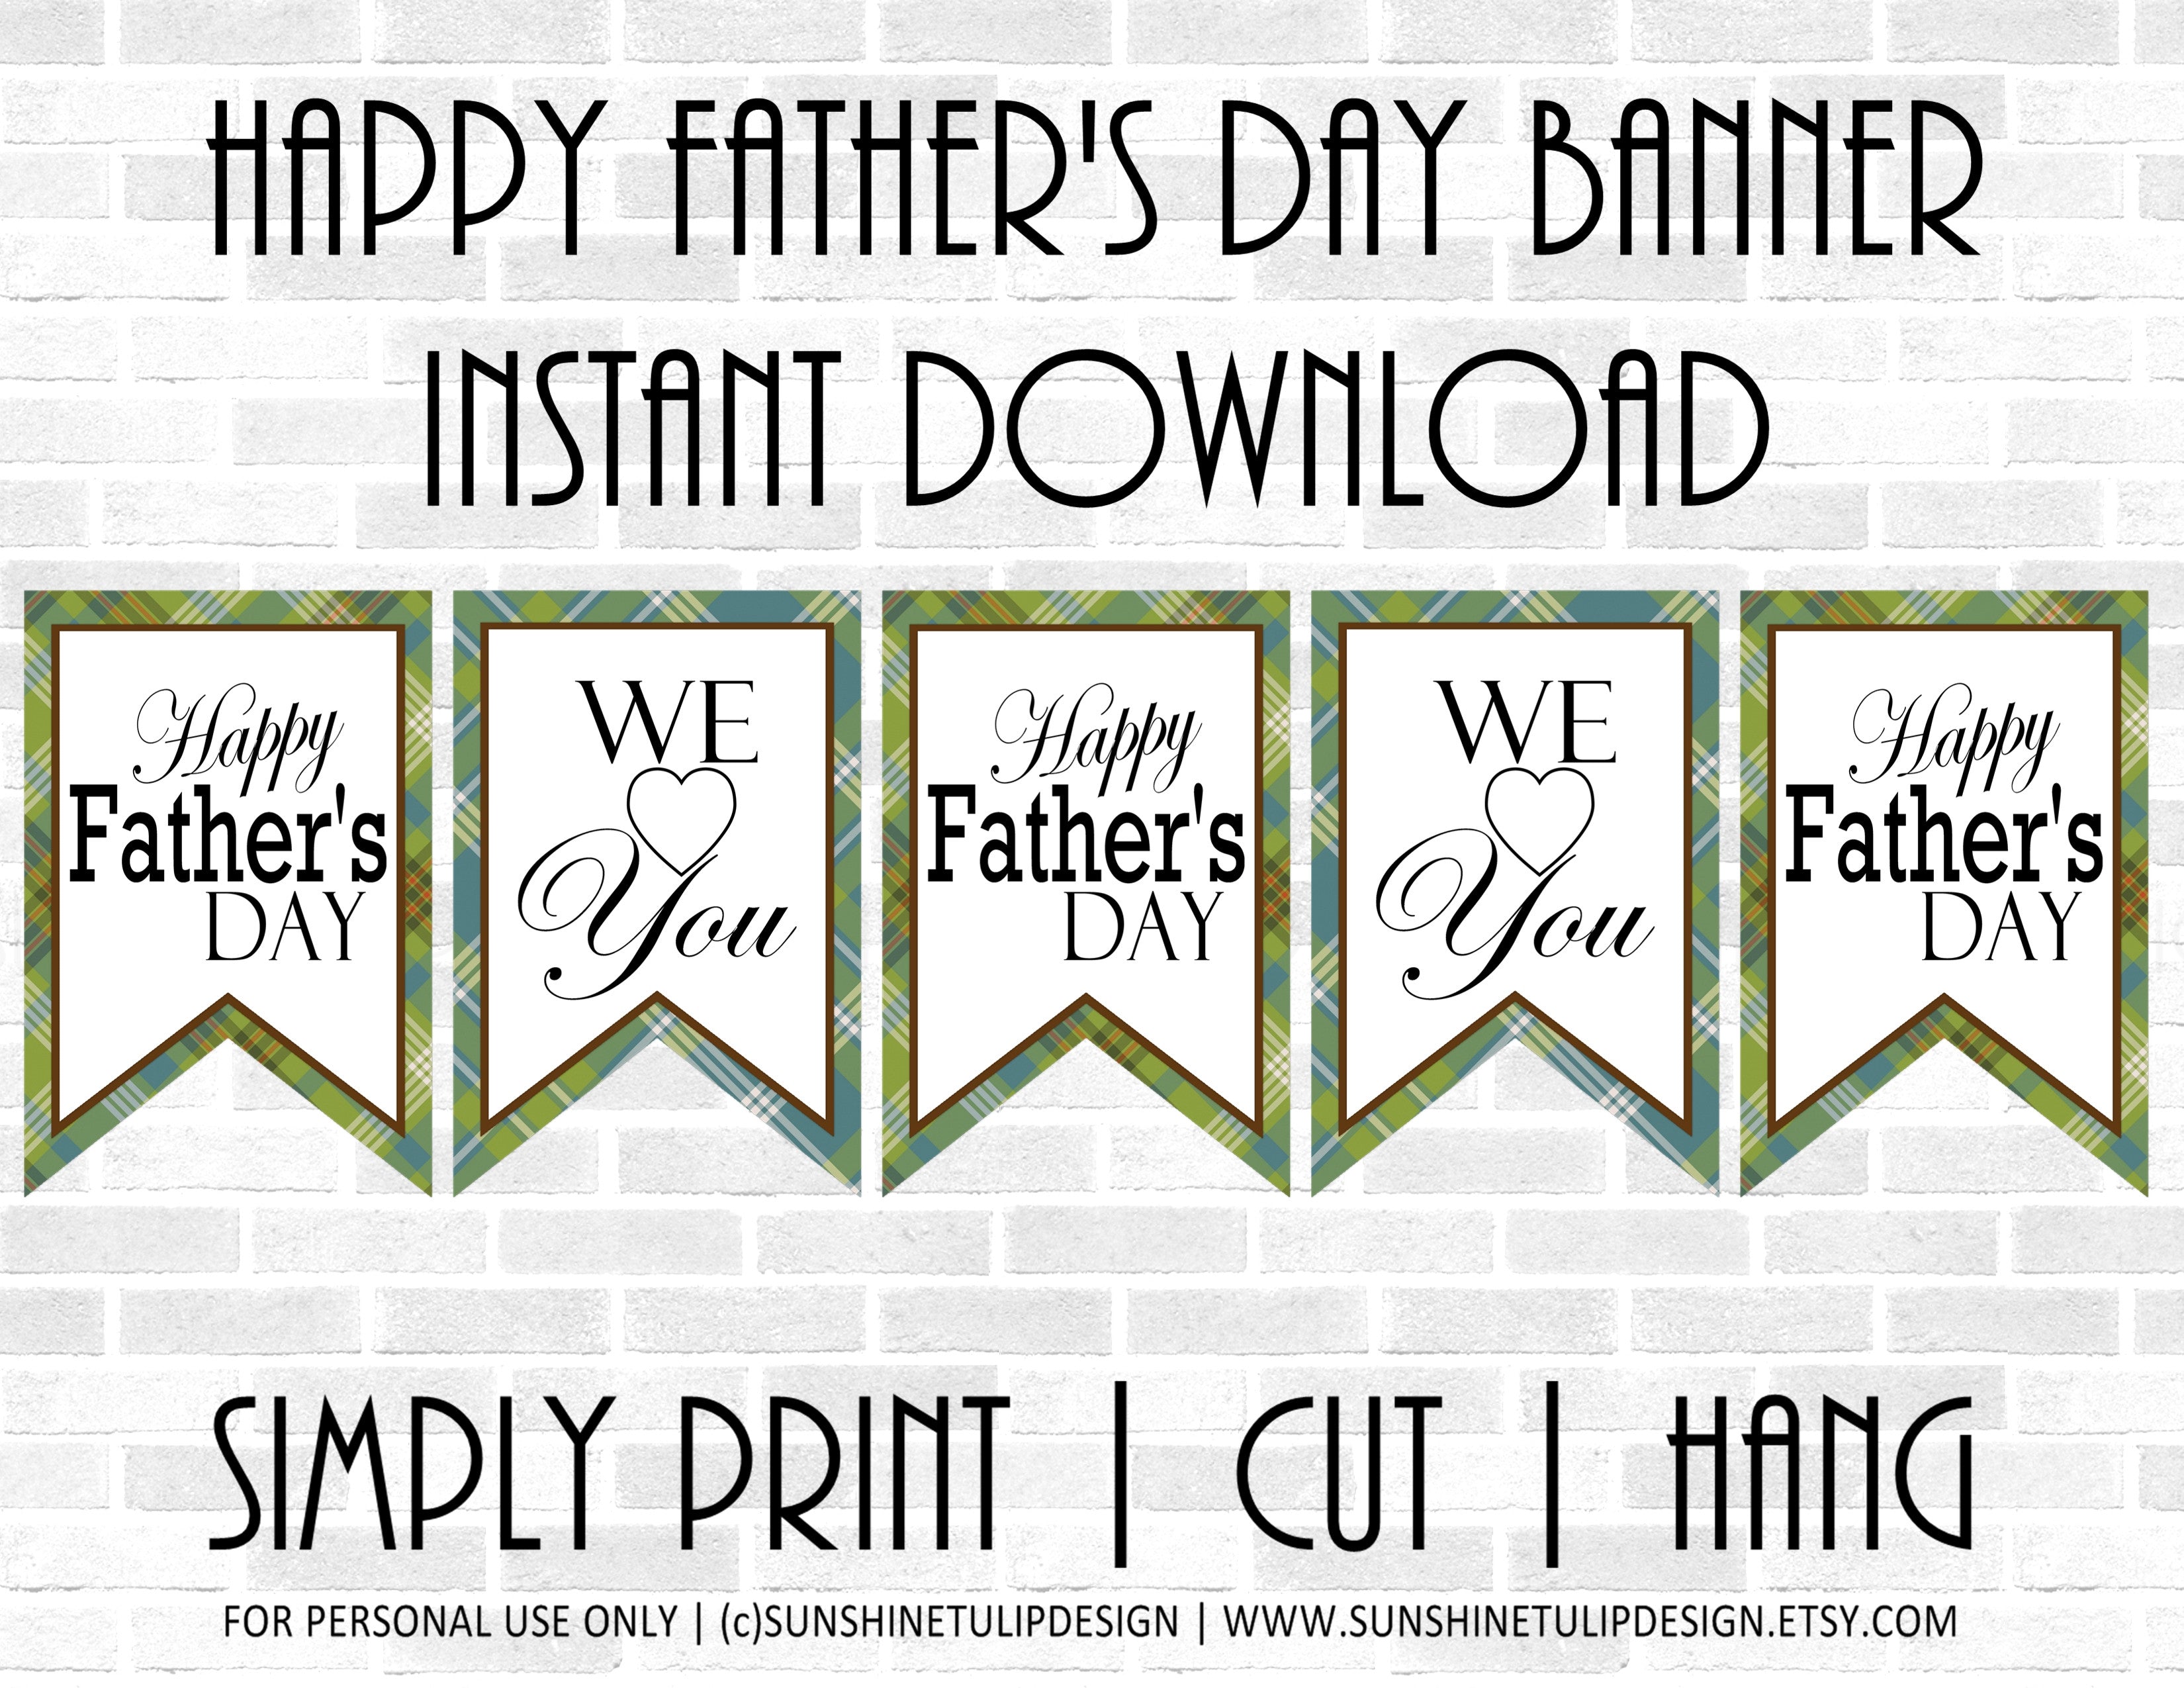 printable-happy-father-s-day-banner-printable-plaid-fathers-day-party